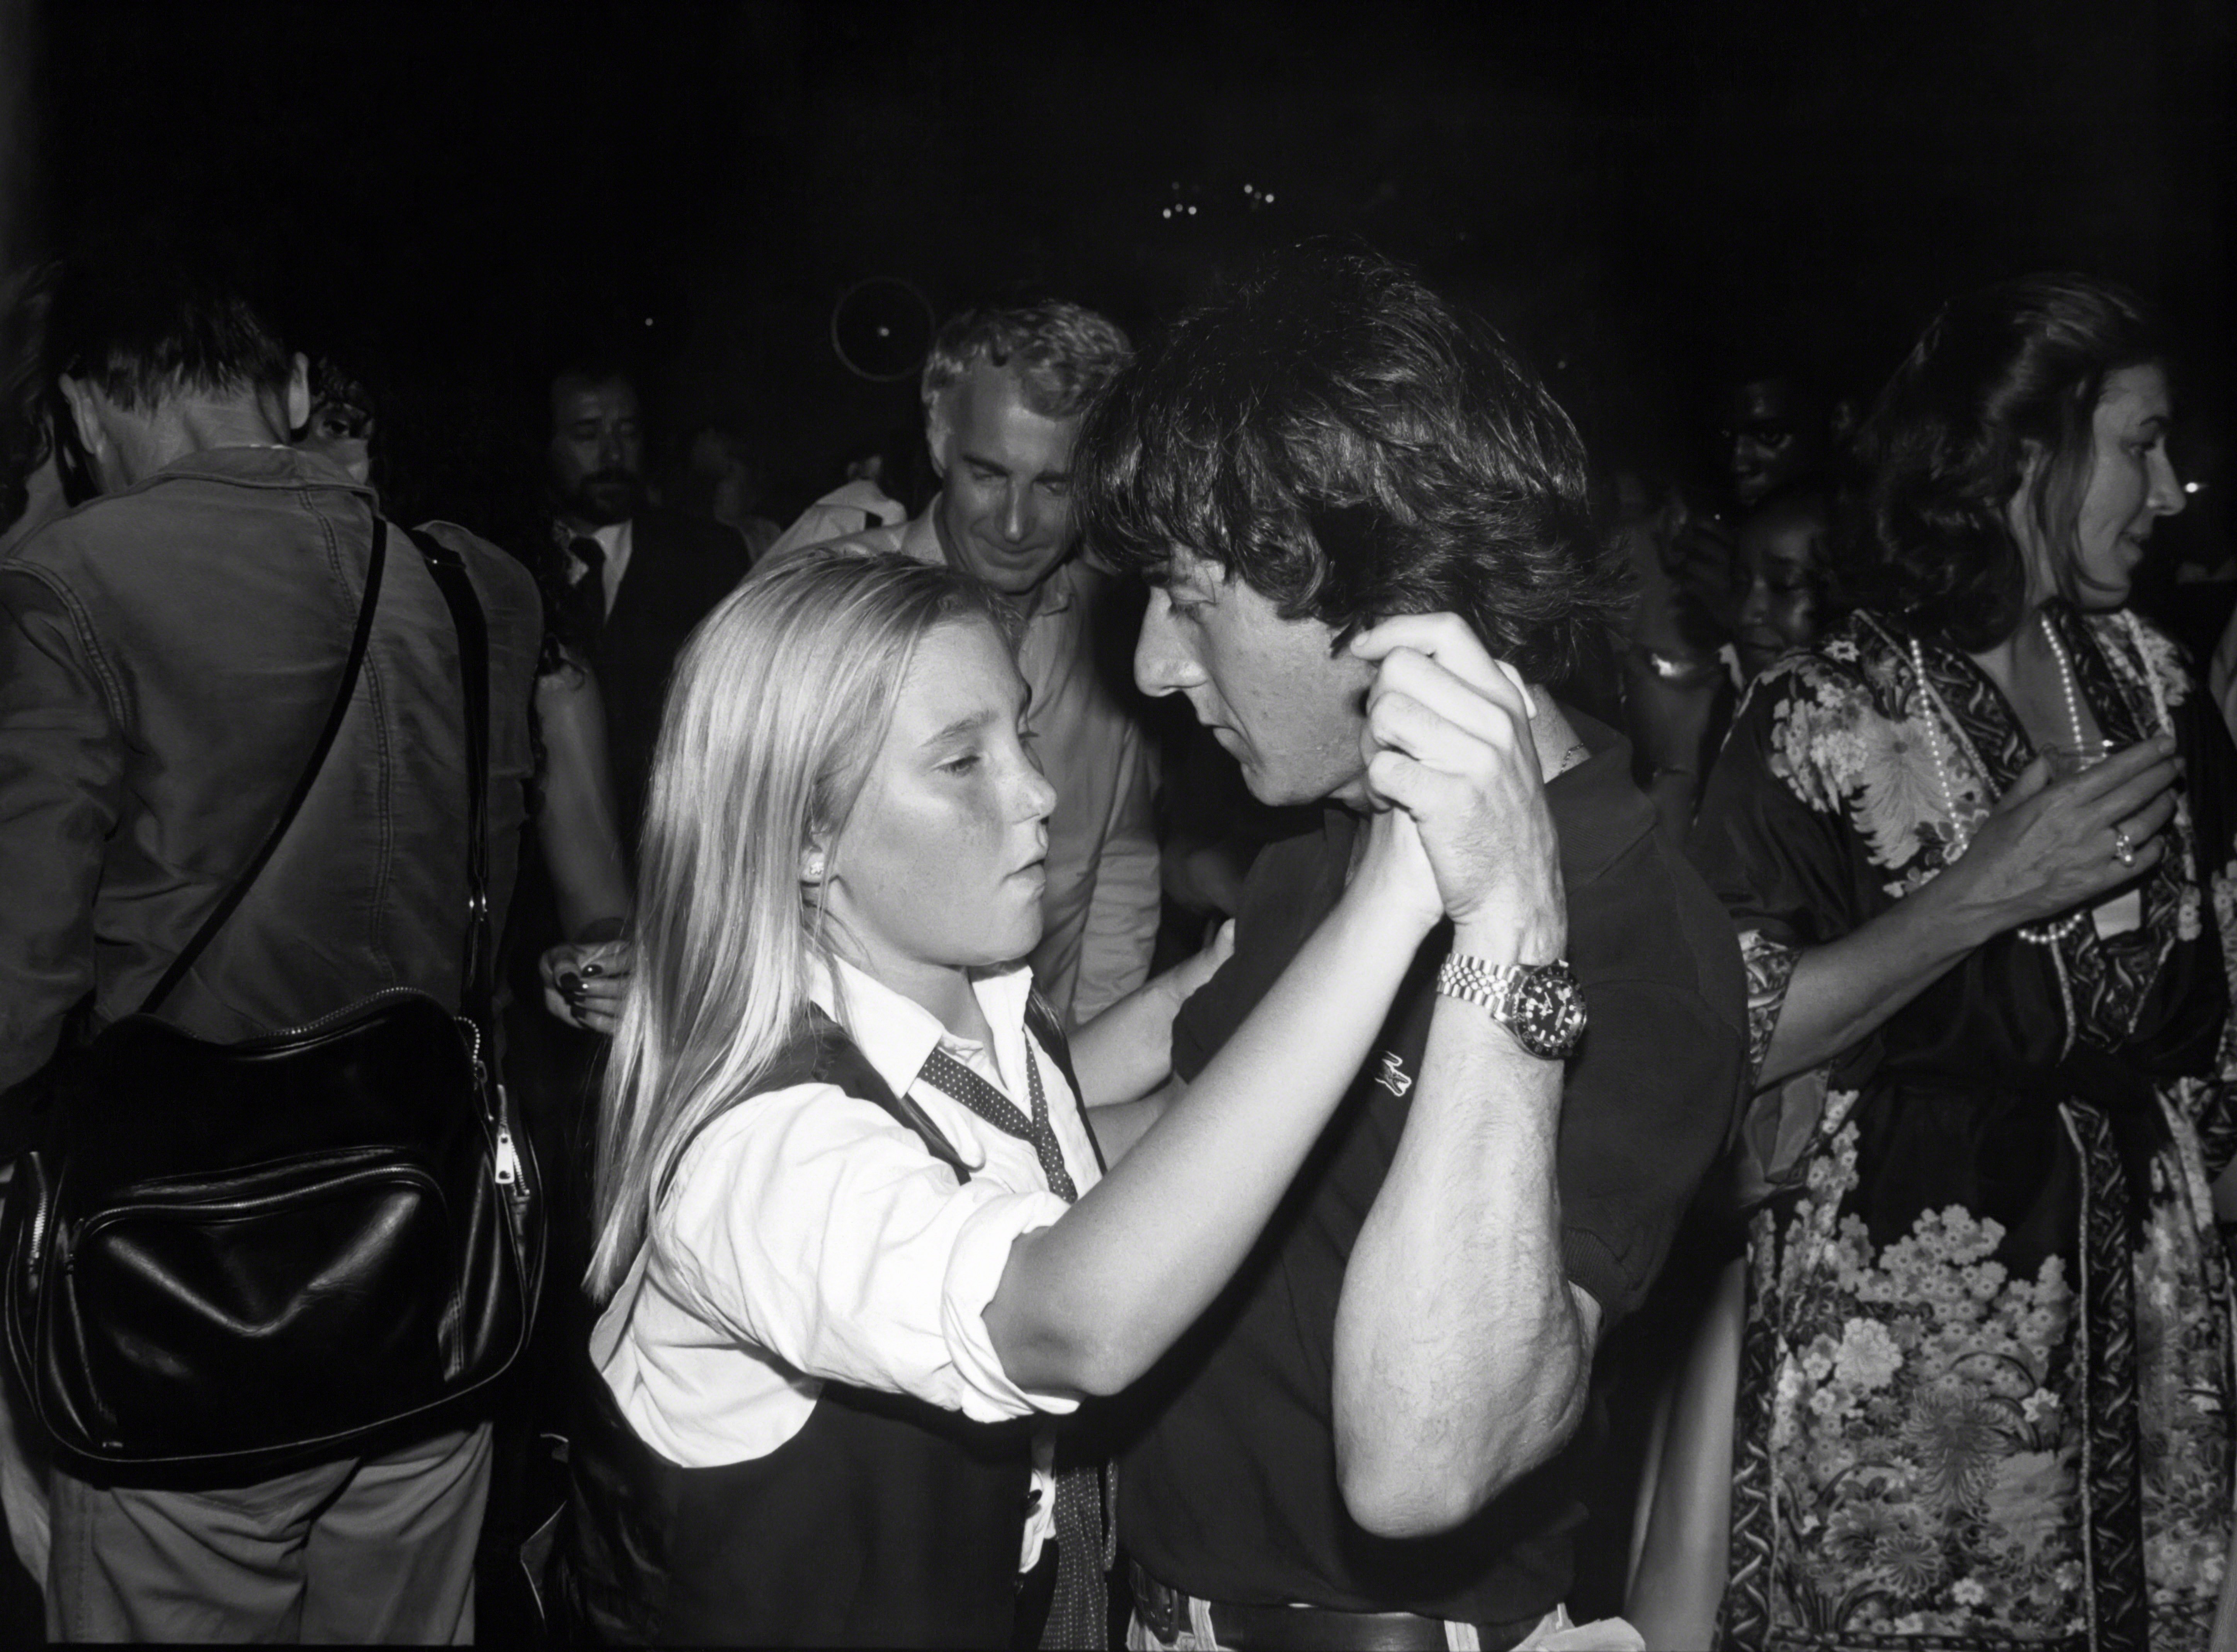 Dustin Hoffman dancing with his daughter, Karina at Xenon disco circa 1978 in New York City | Source: Getty Images